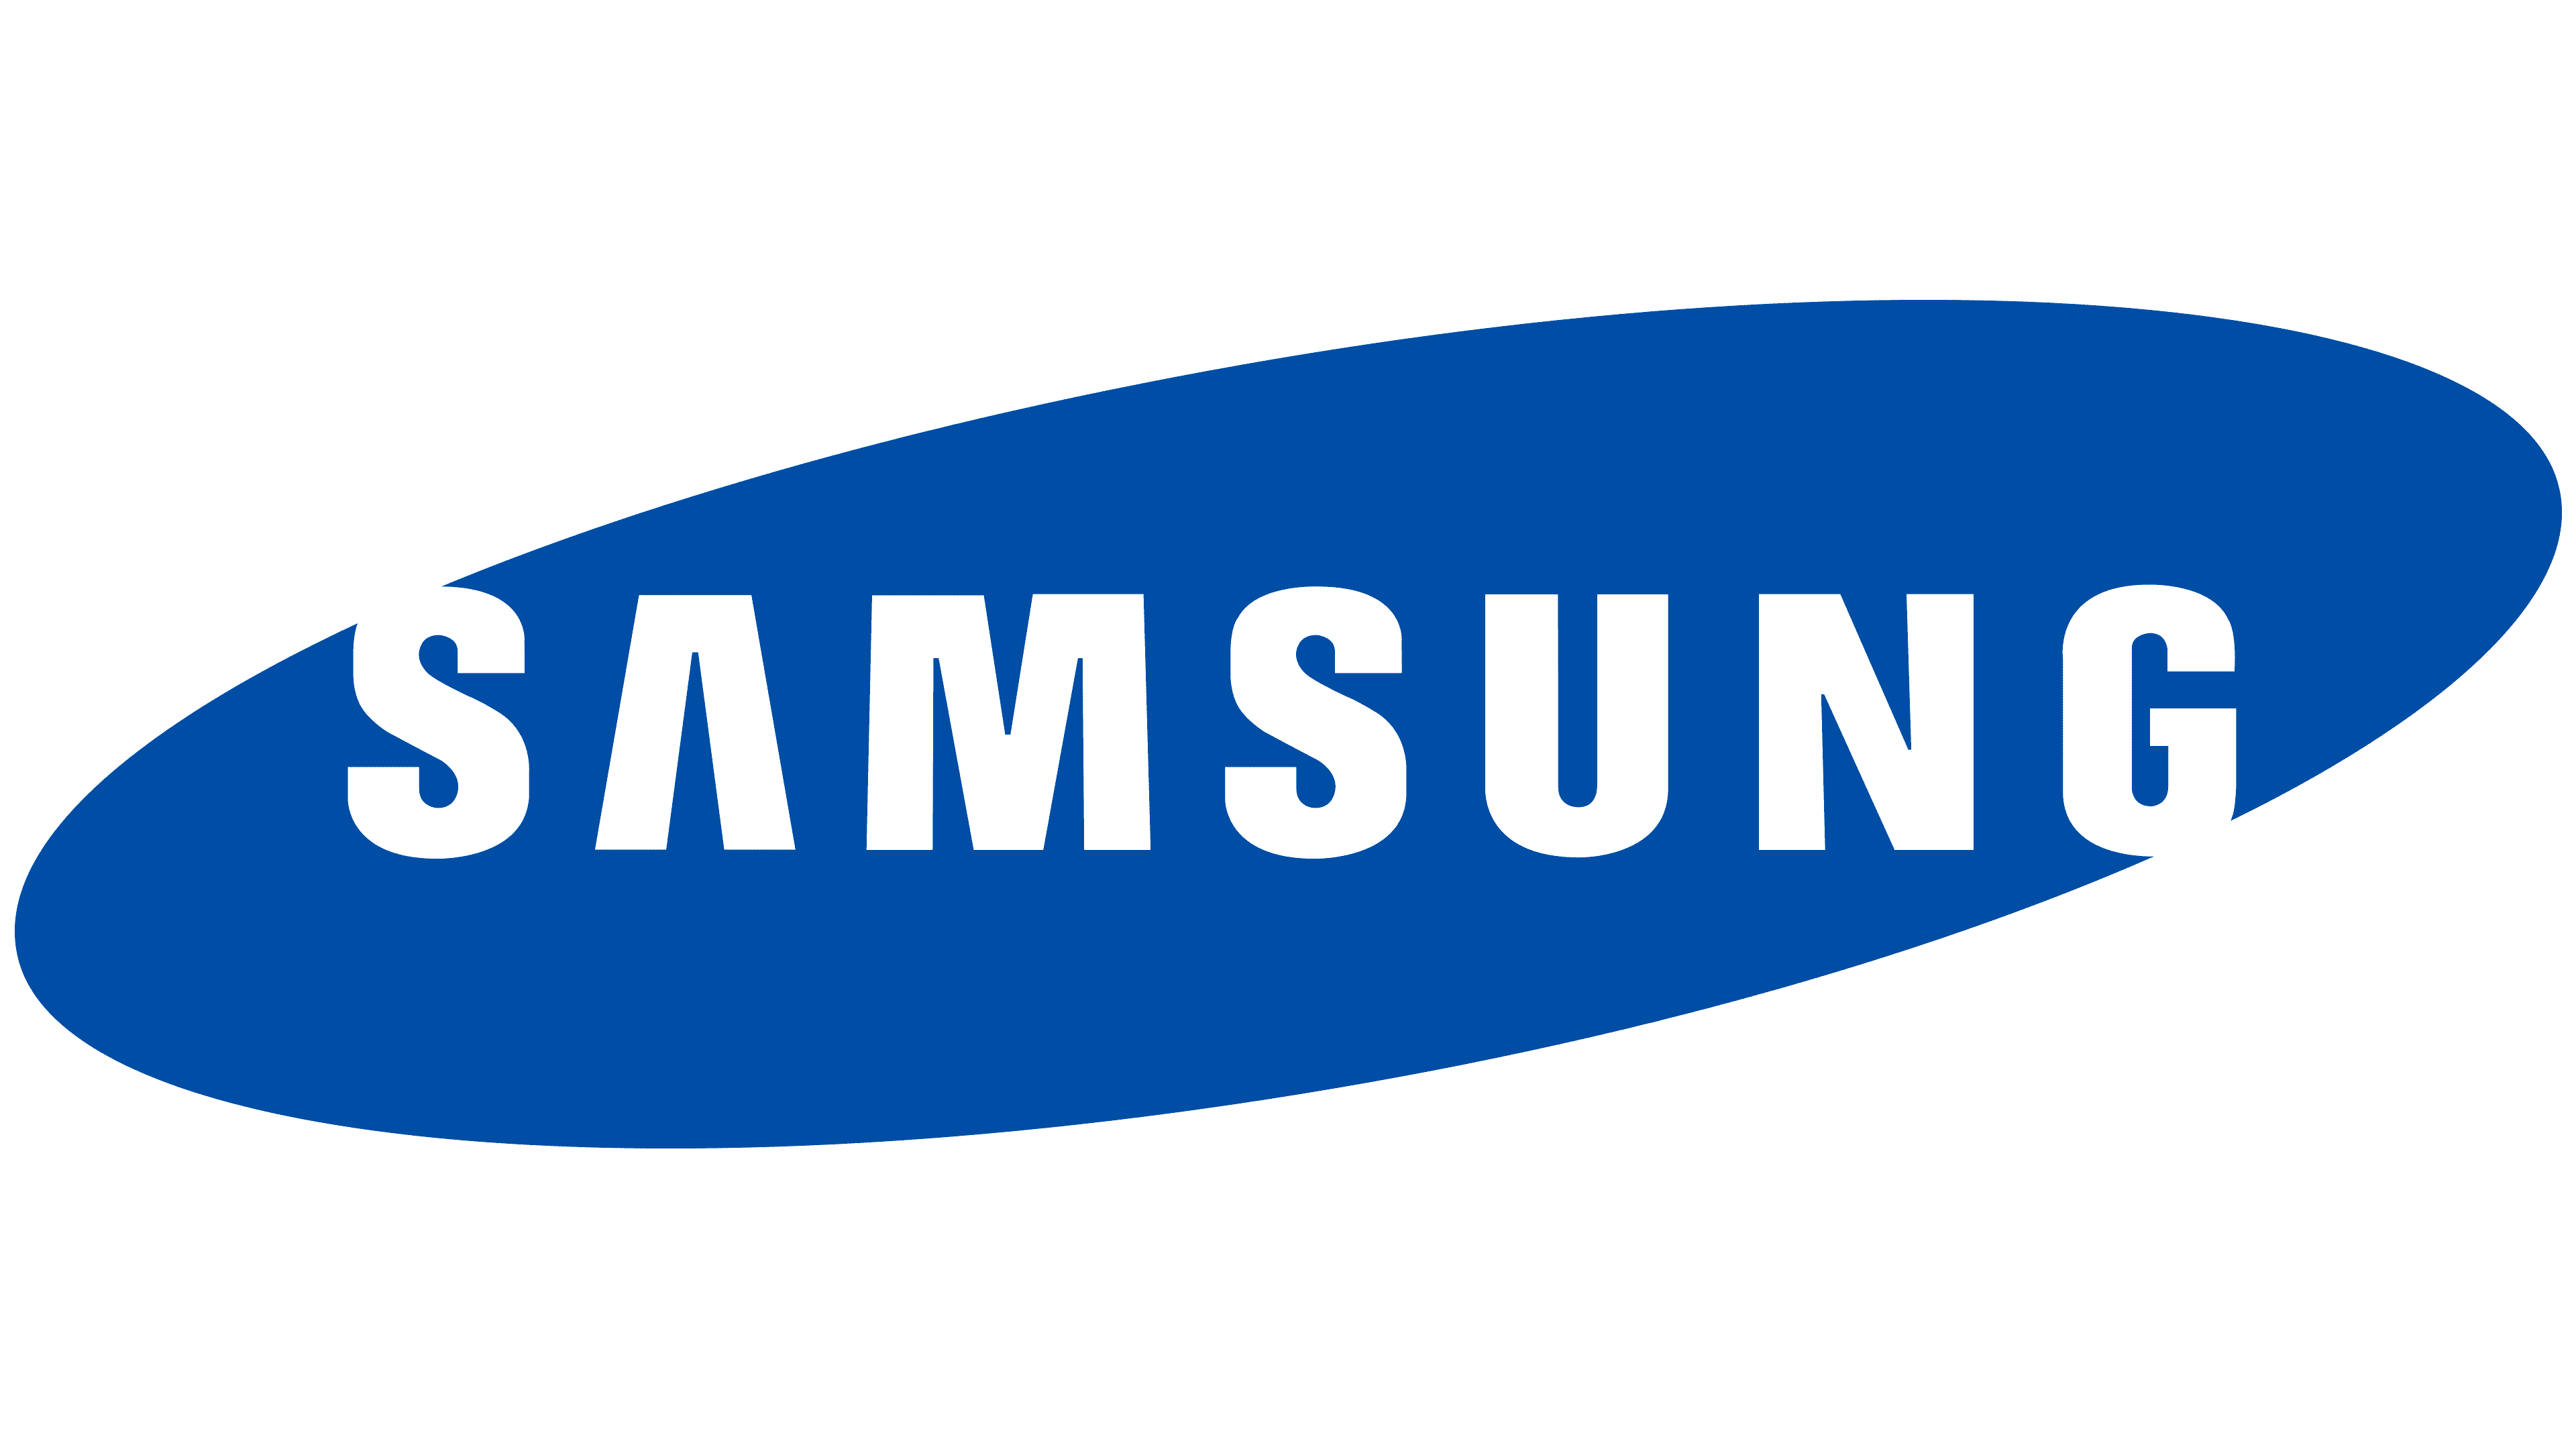 Samsung and Ercom have entered into a partnership to provide a new generation security solution